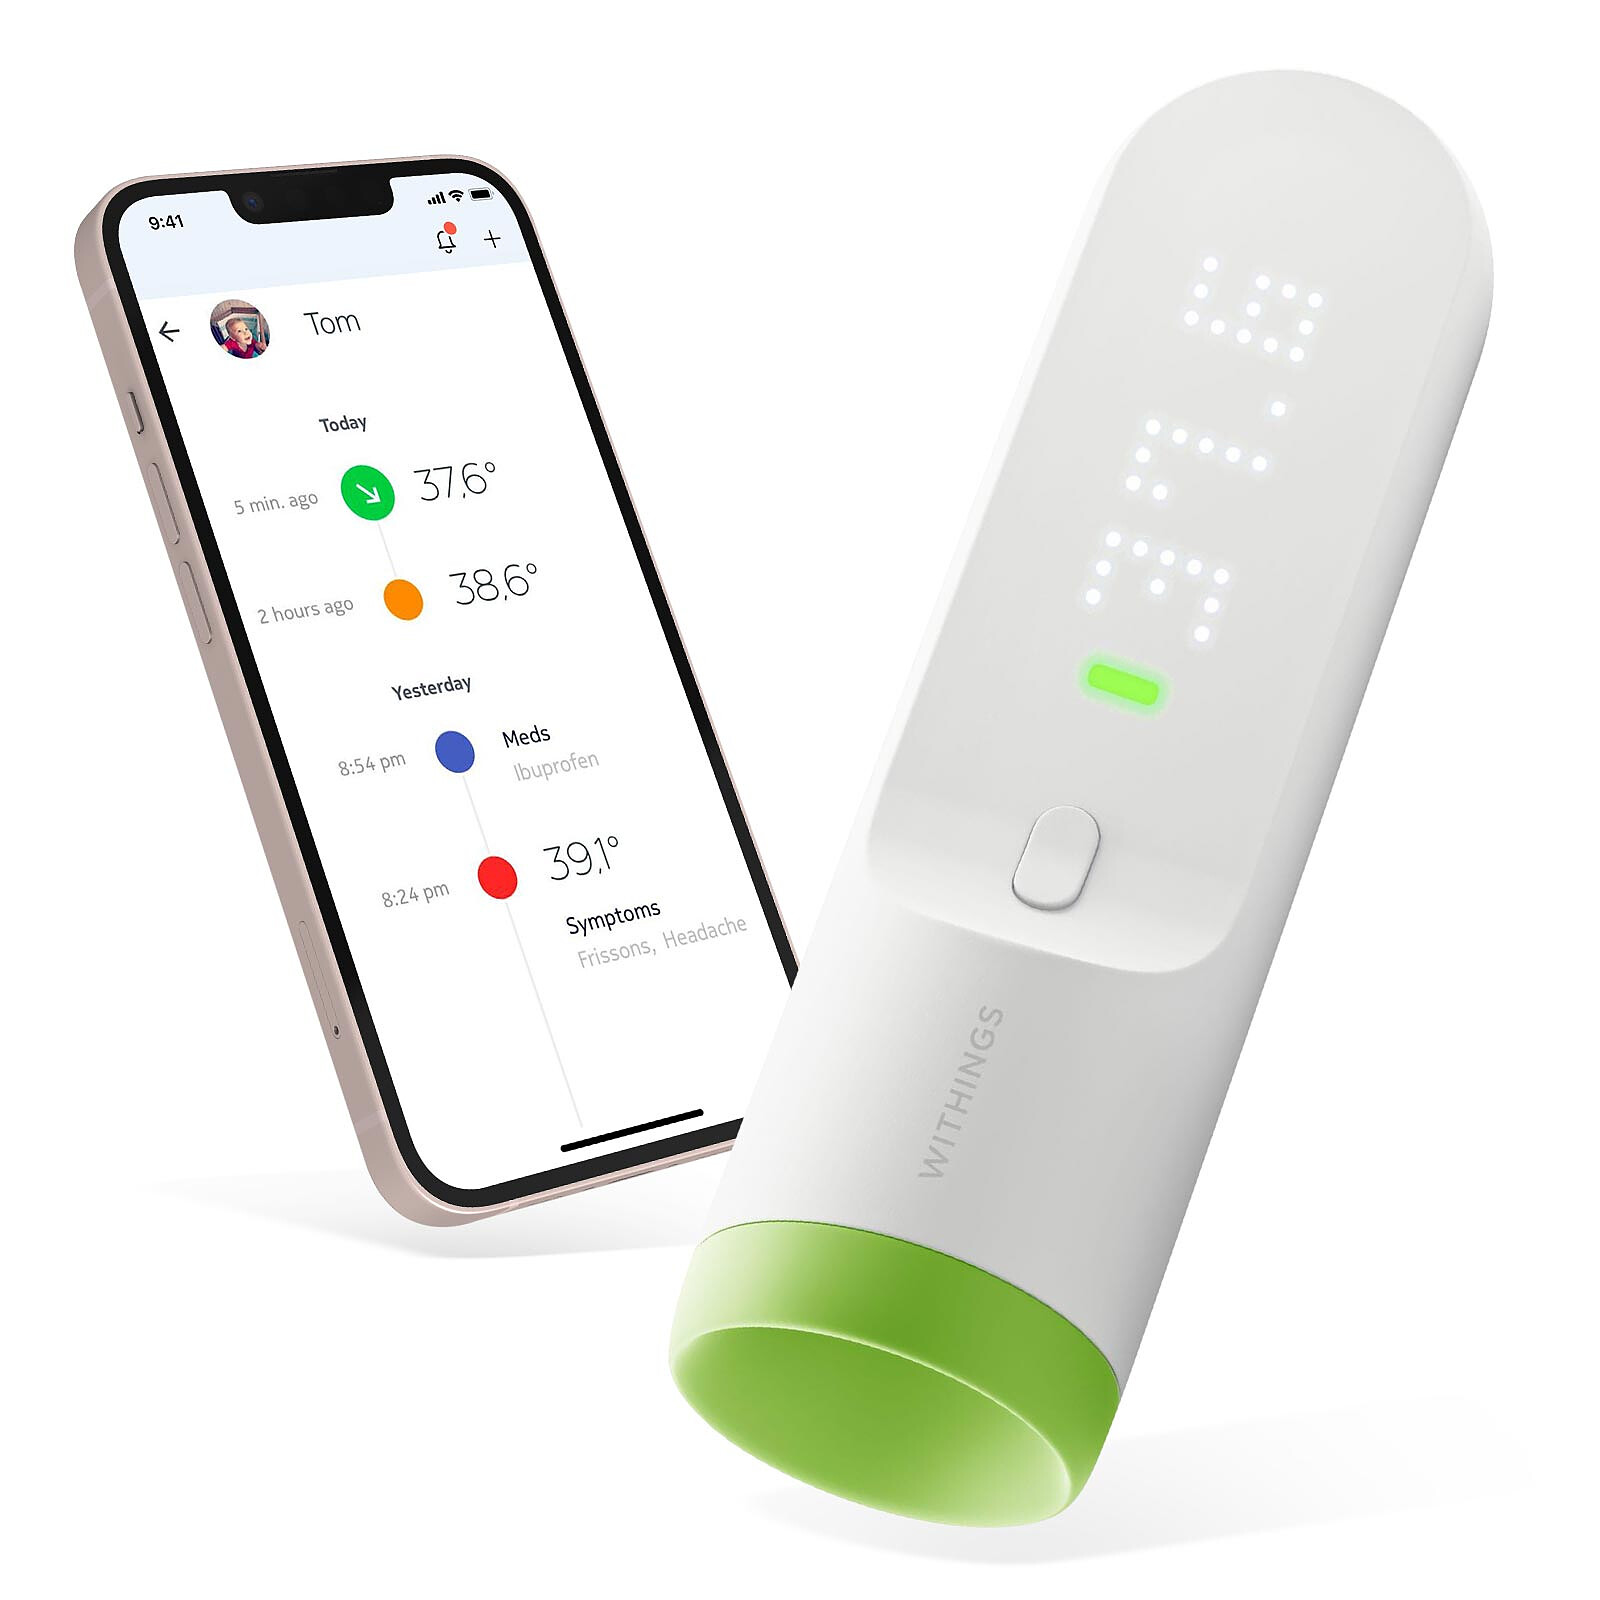 Withings Thermomètre Temporal Connecté Wifi Bluetooth HotSpot